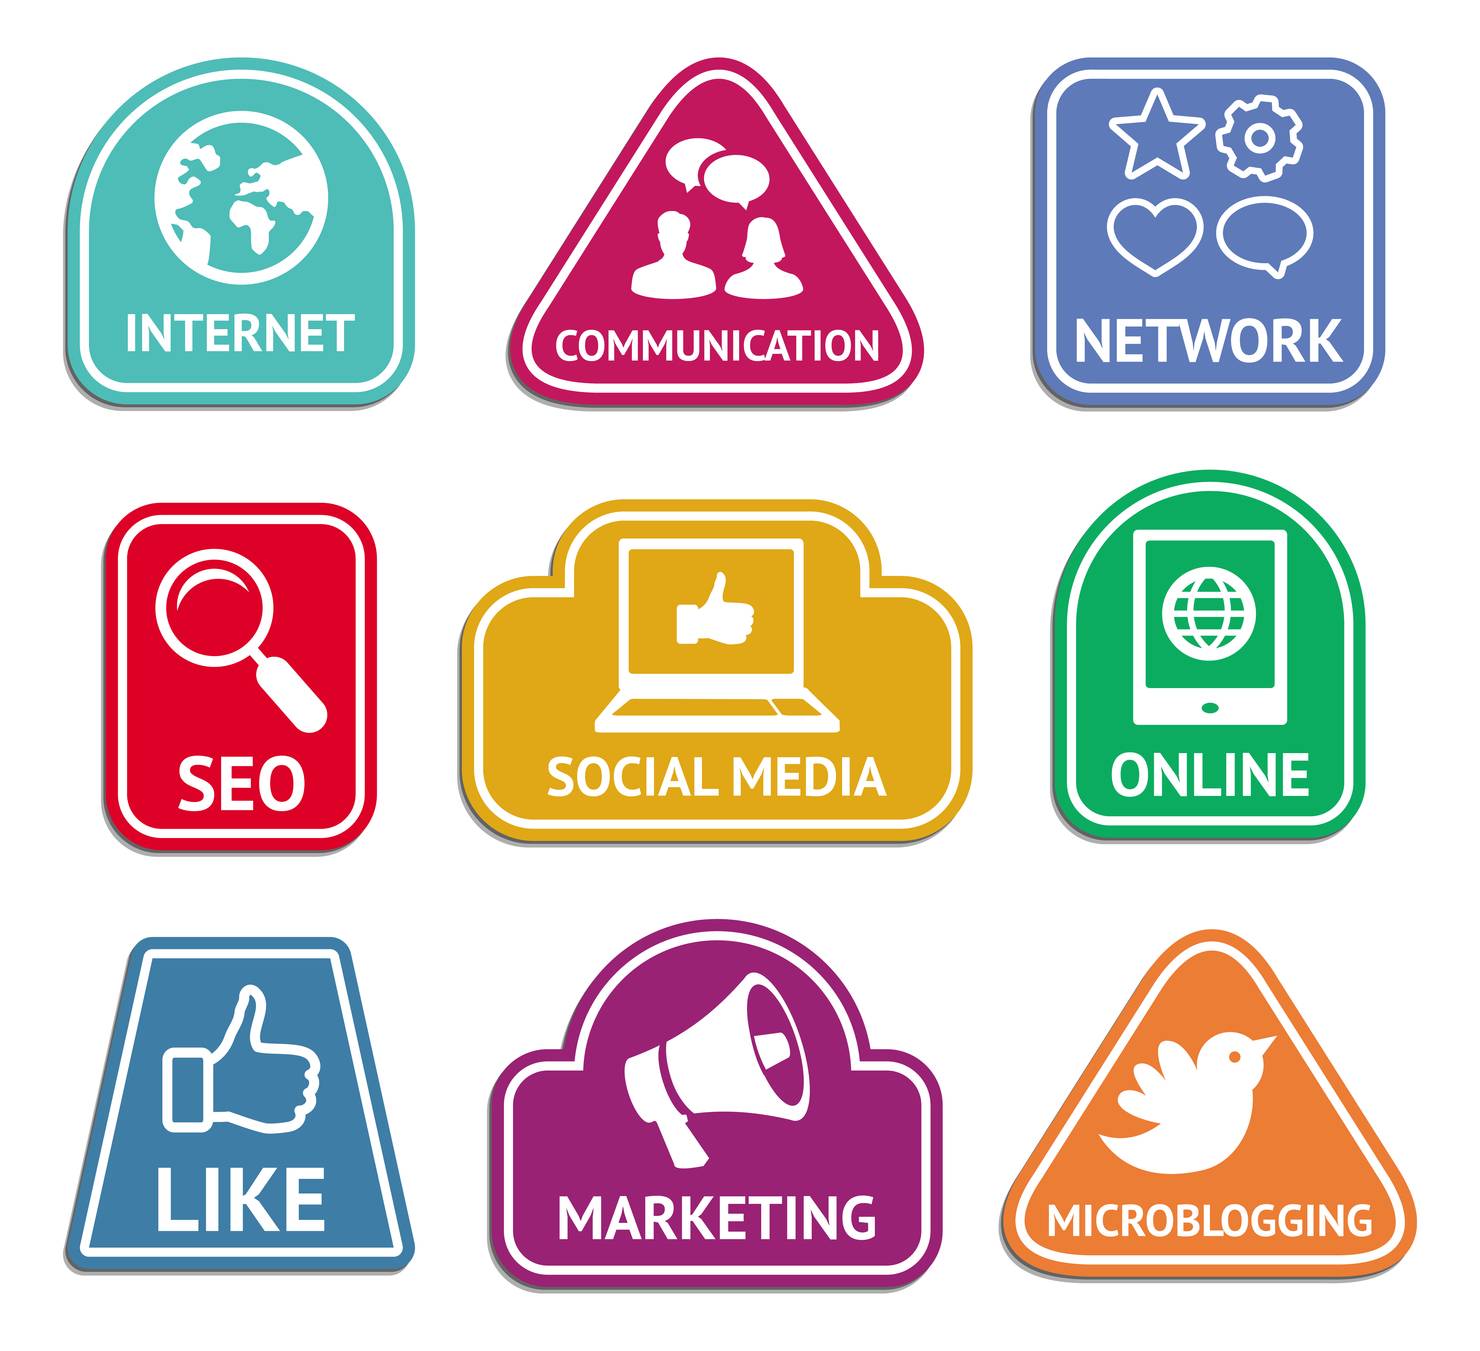 Can You Benefit From Internet Marketing Consulting in McKinney TX?